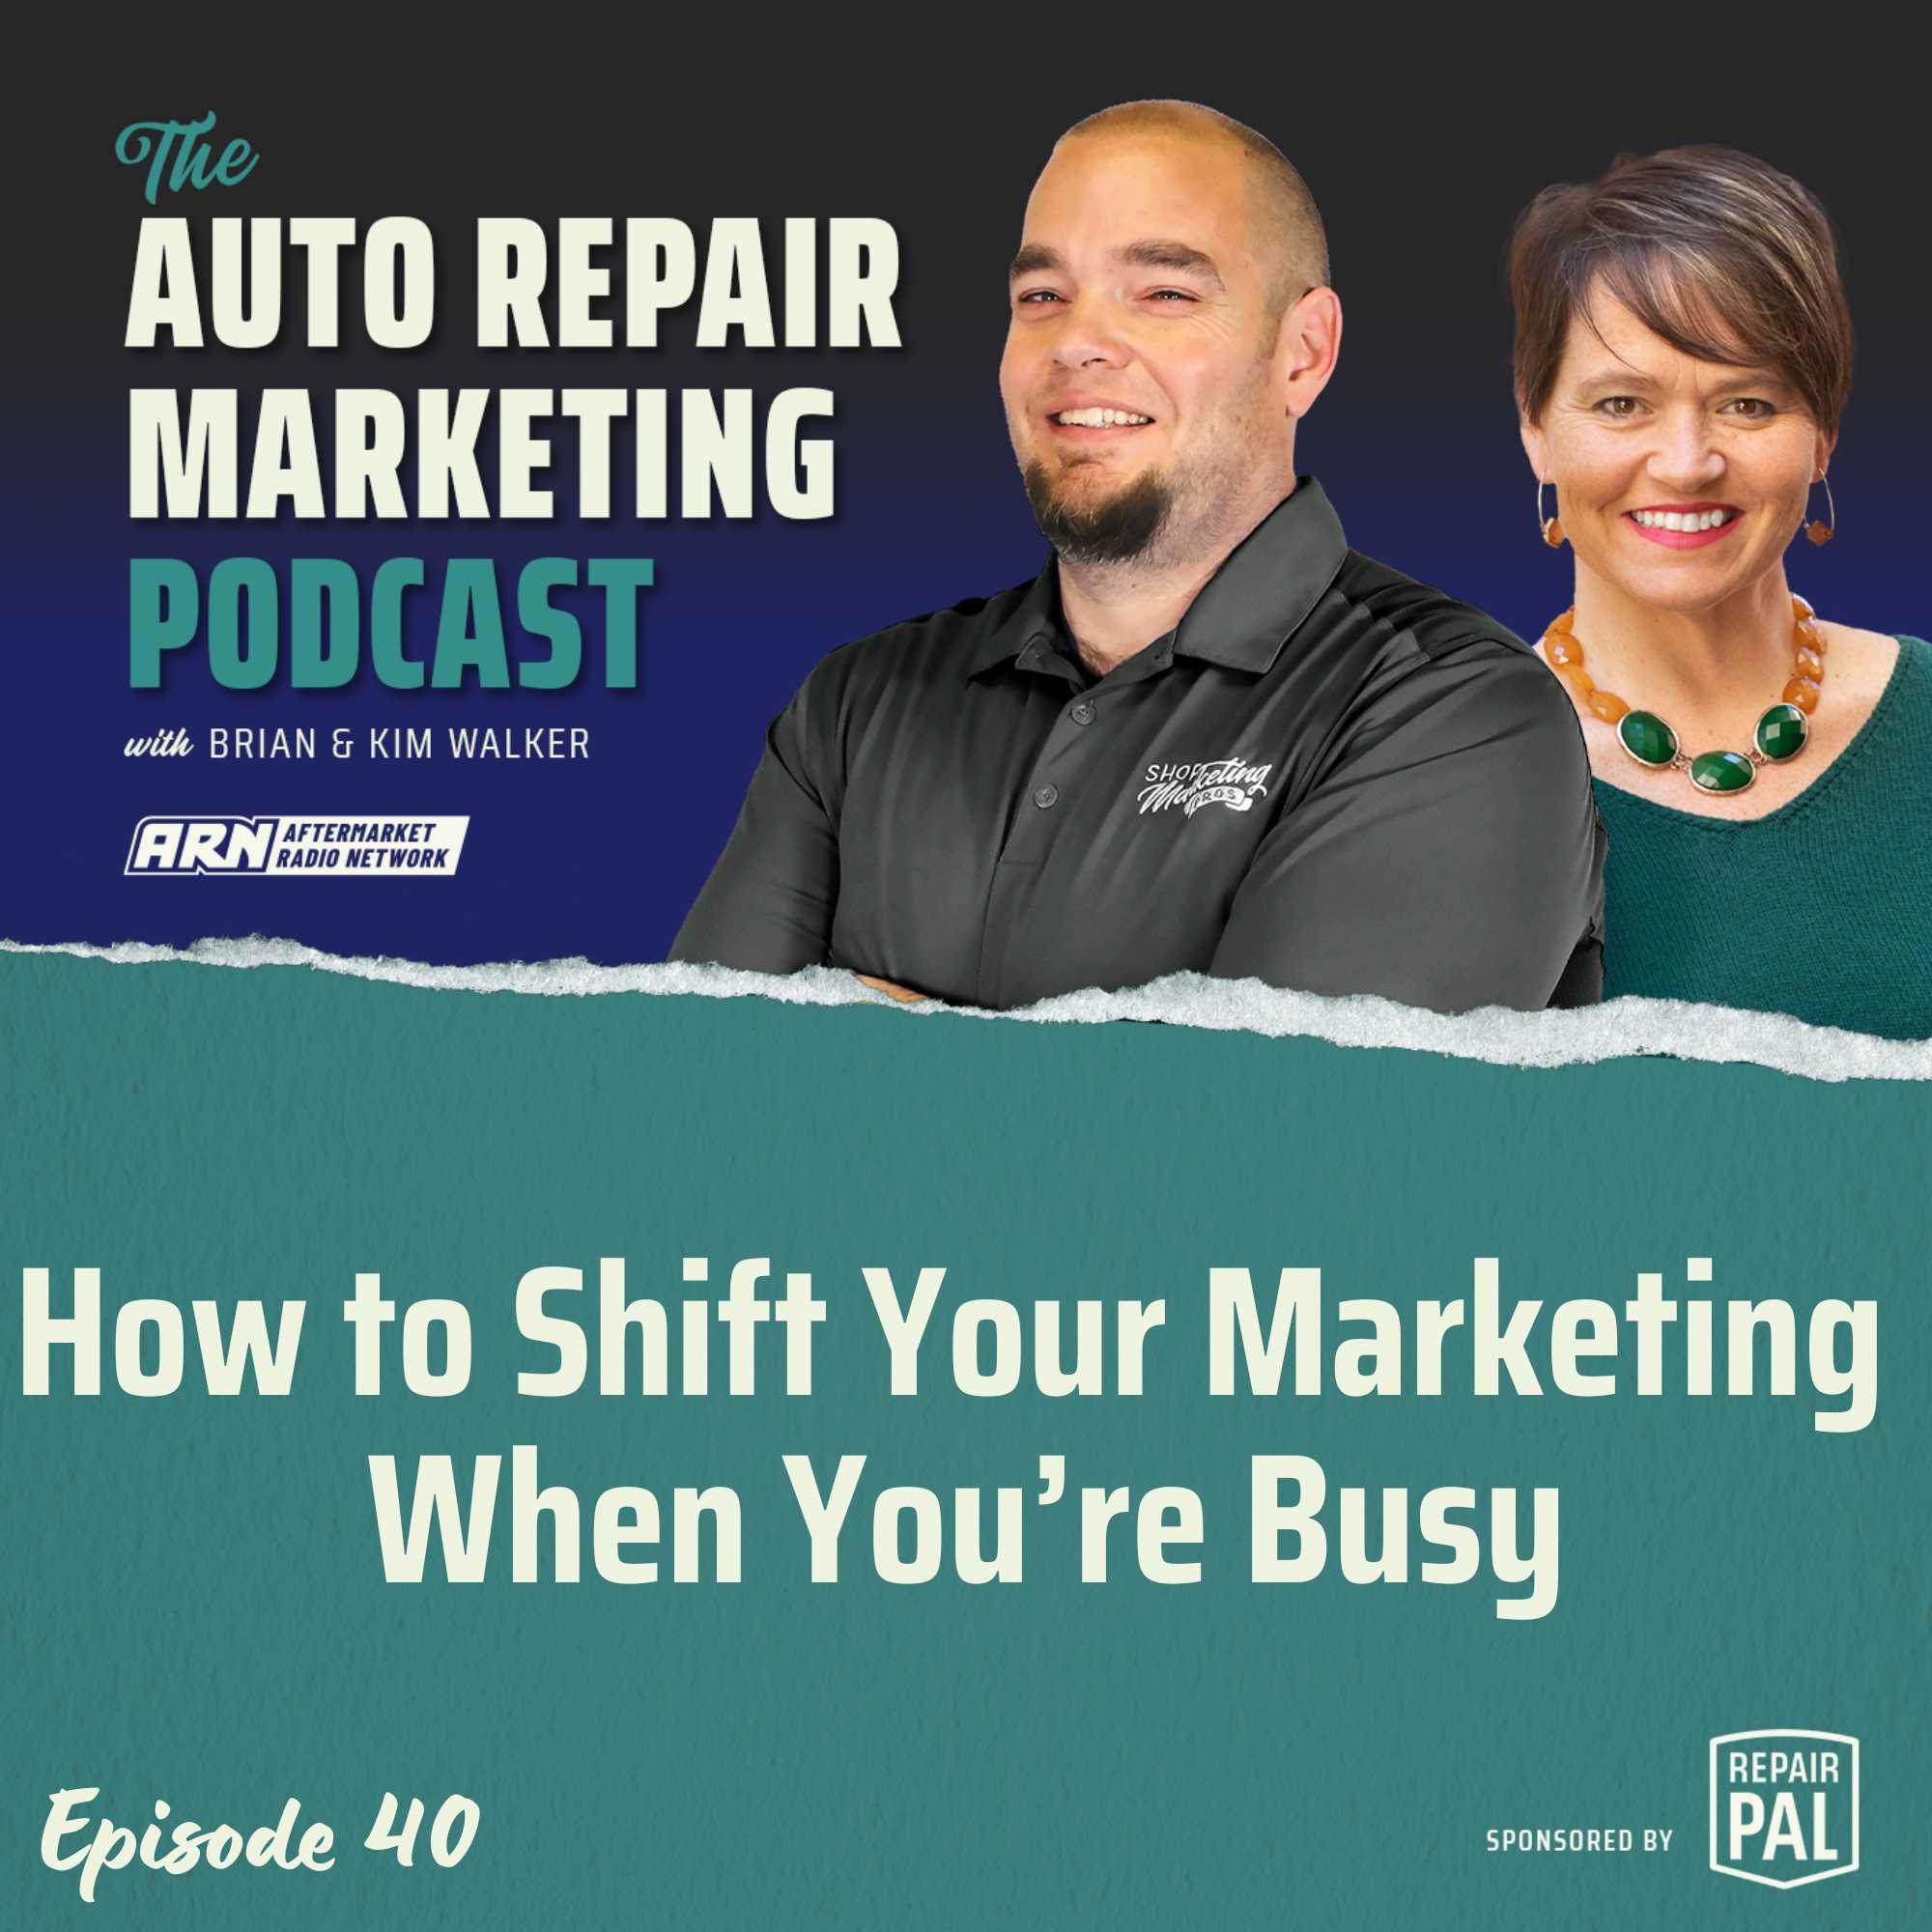 The Auto Repair Marketing Podcast Episode 40. Brian & Kim Walker talking about the topic "How to Shift Your Marketing When You’re Busy". Sponsored by Repair Pal.